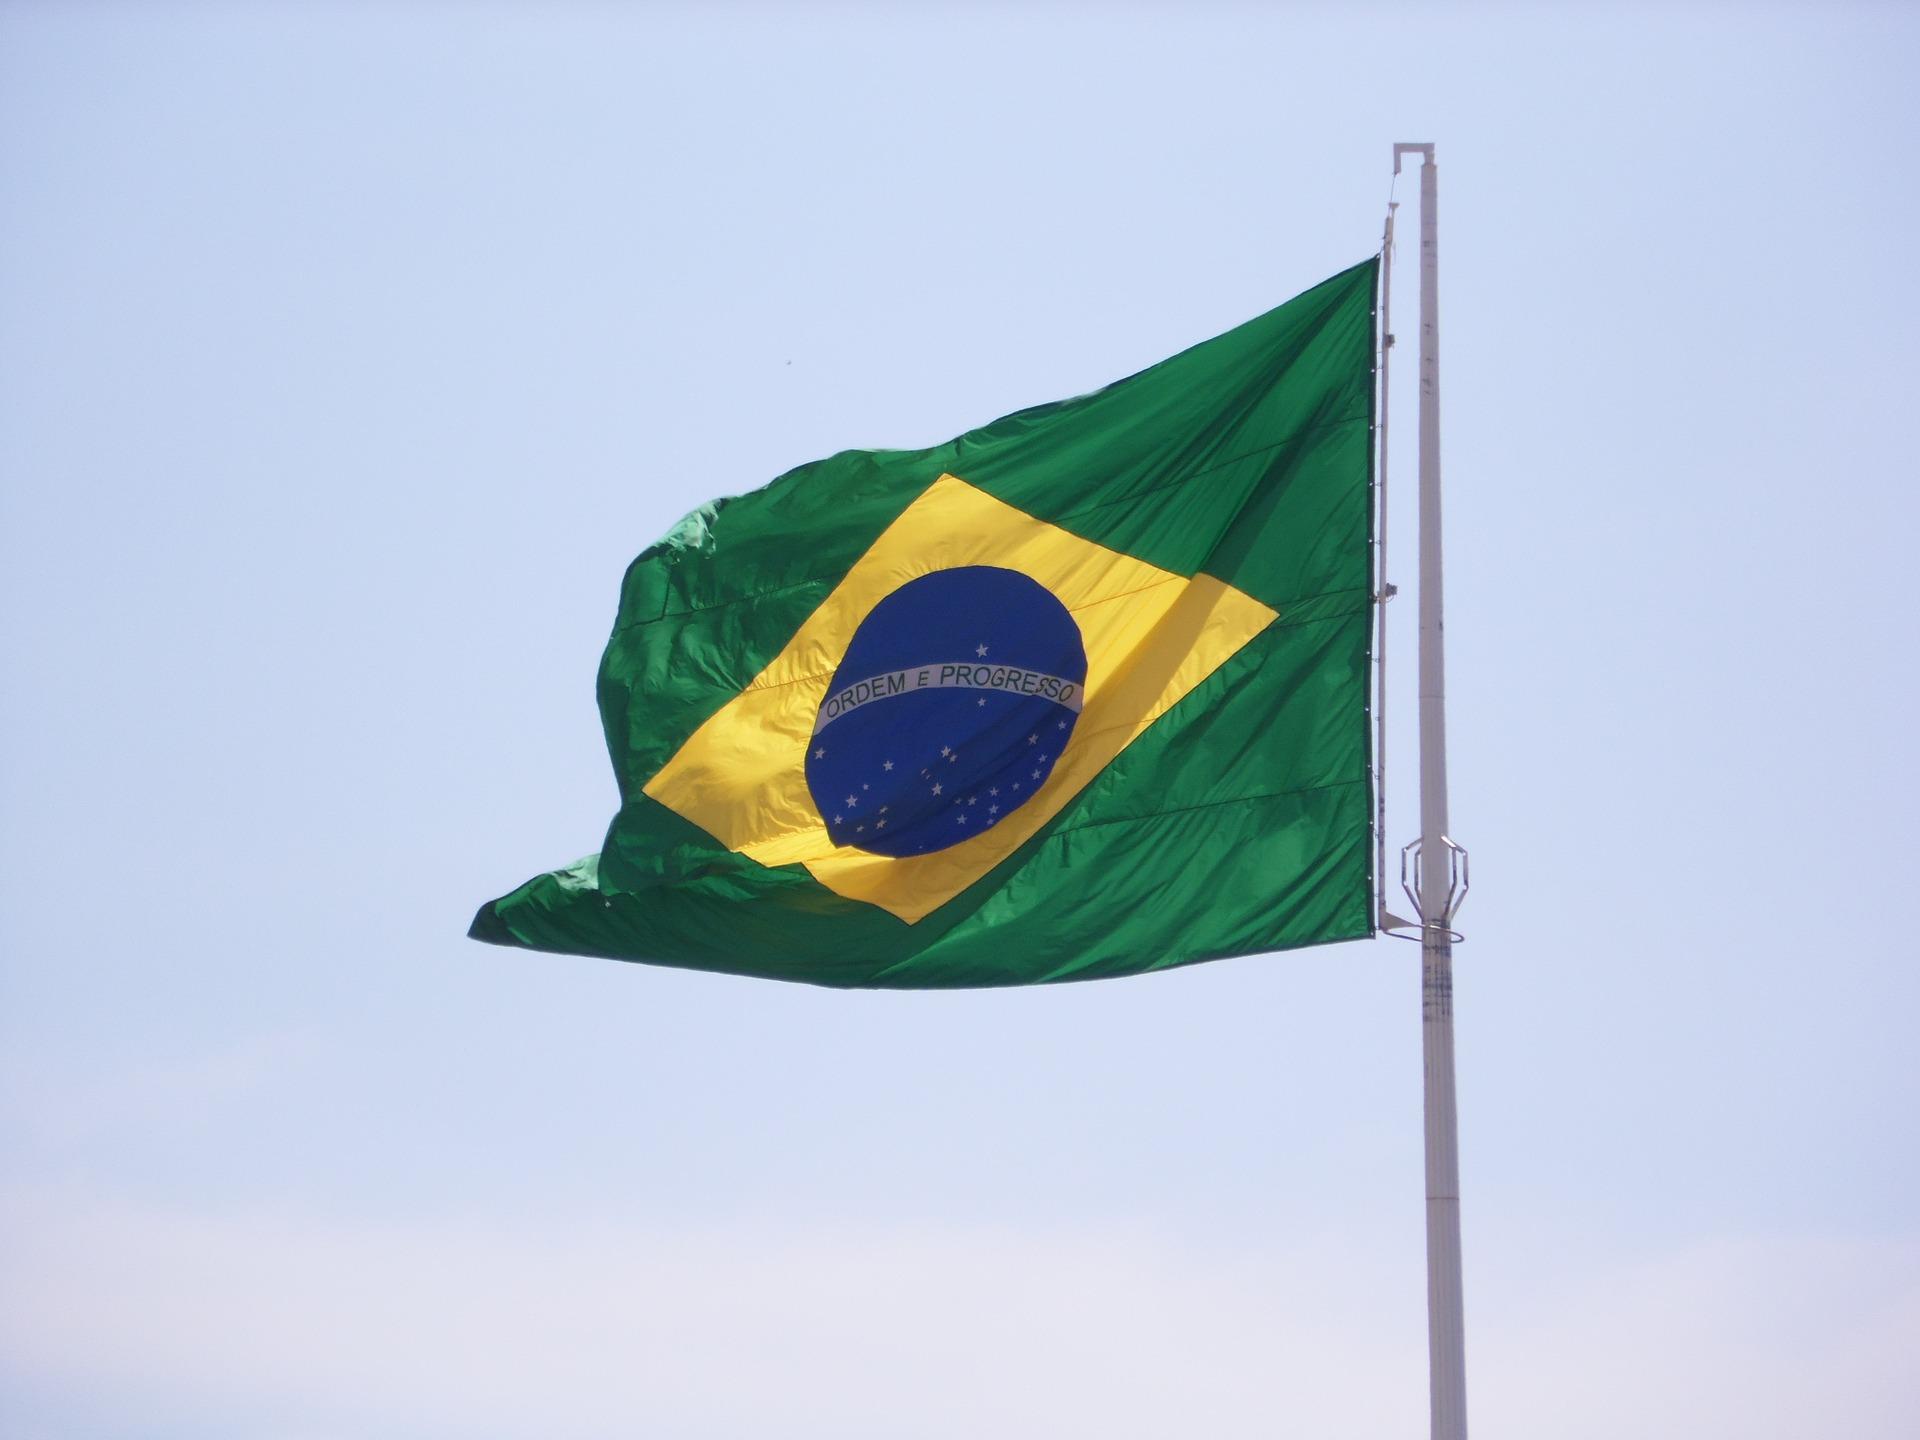 Brazil: Total and Petrobras take new steps forward in the scope of ...